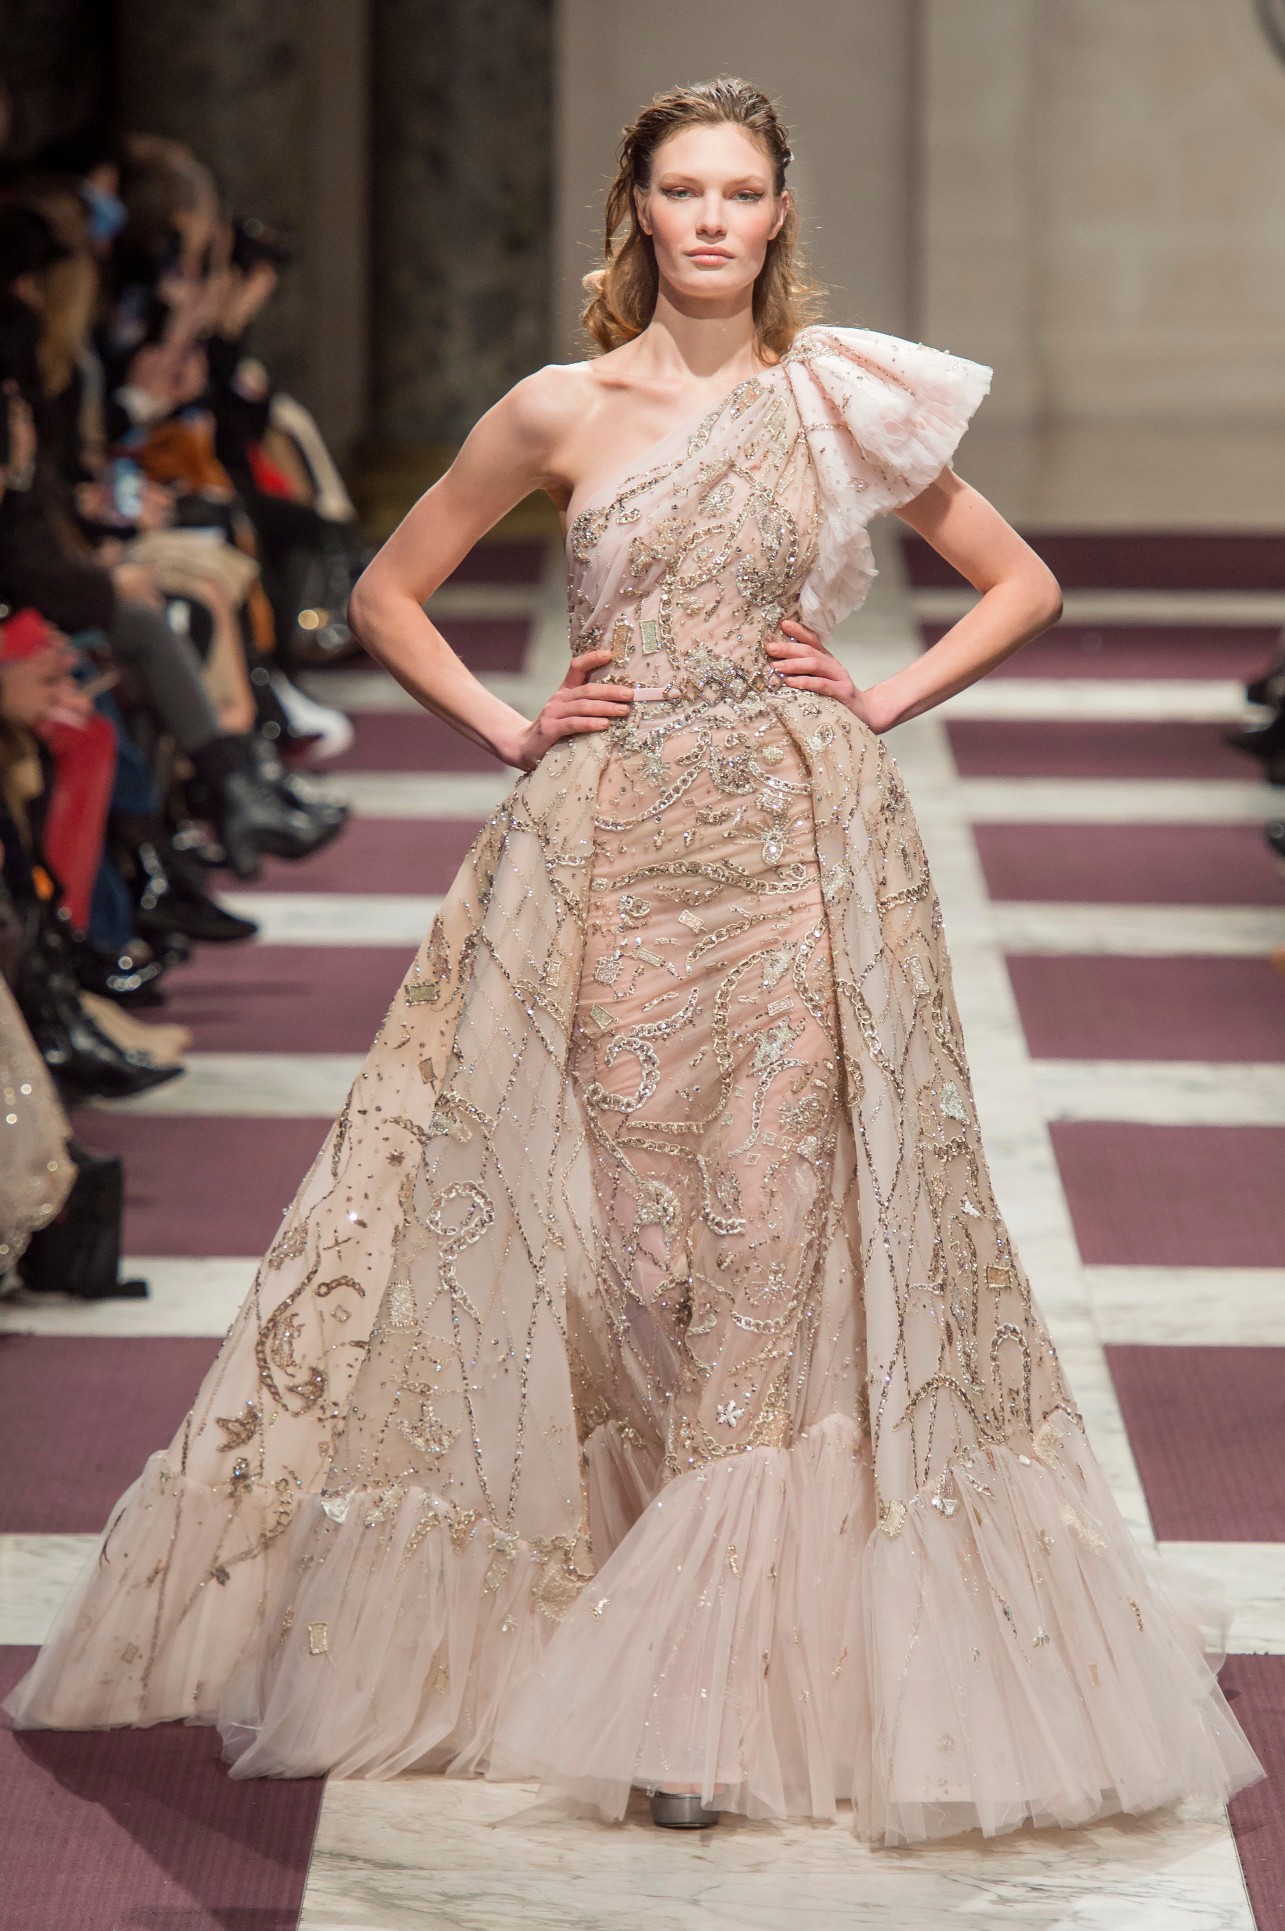 Spring 2019 Haute Couture: Ziad Nakad's Orion — CoutureNotebook